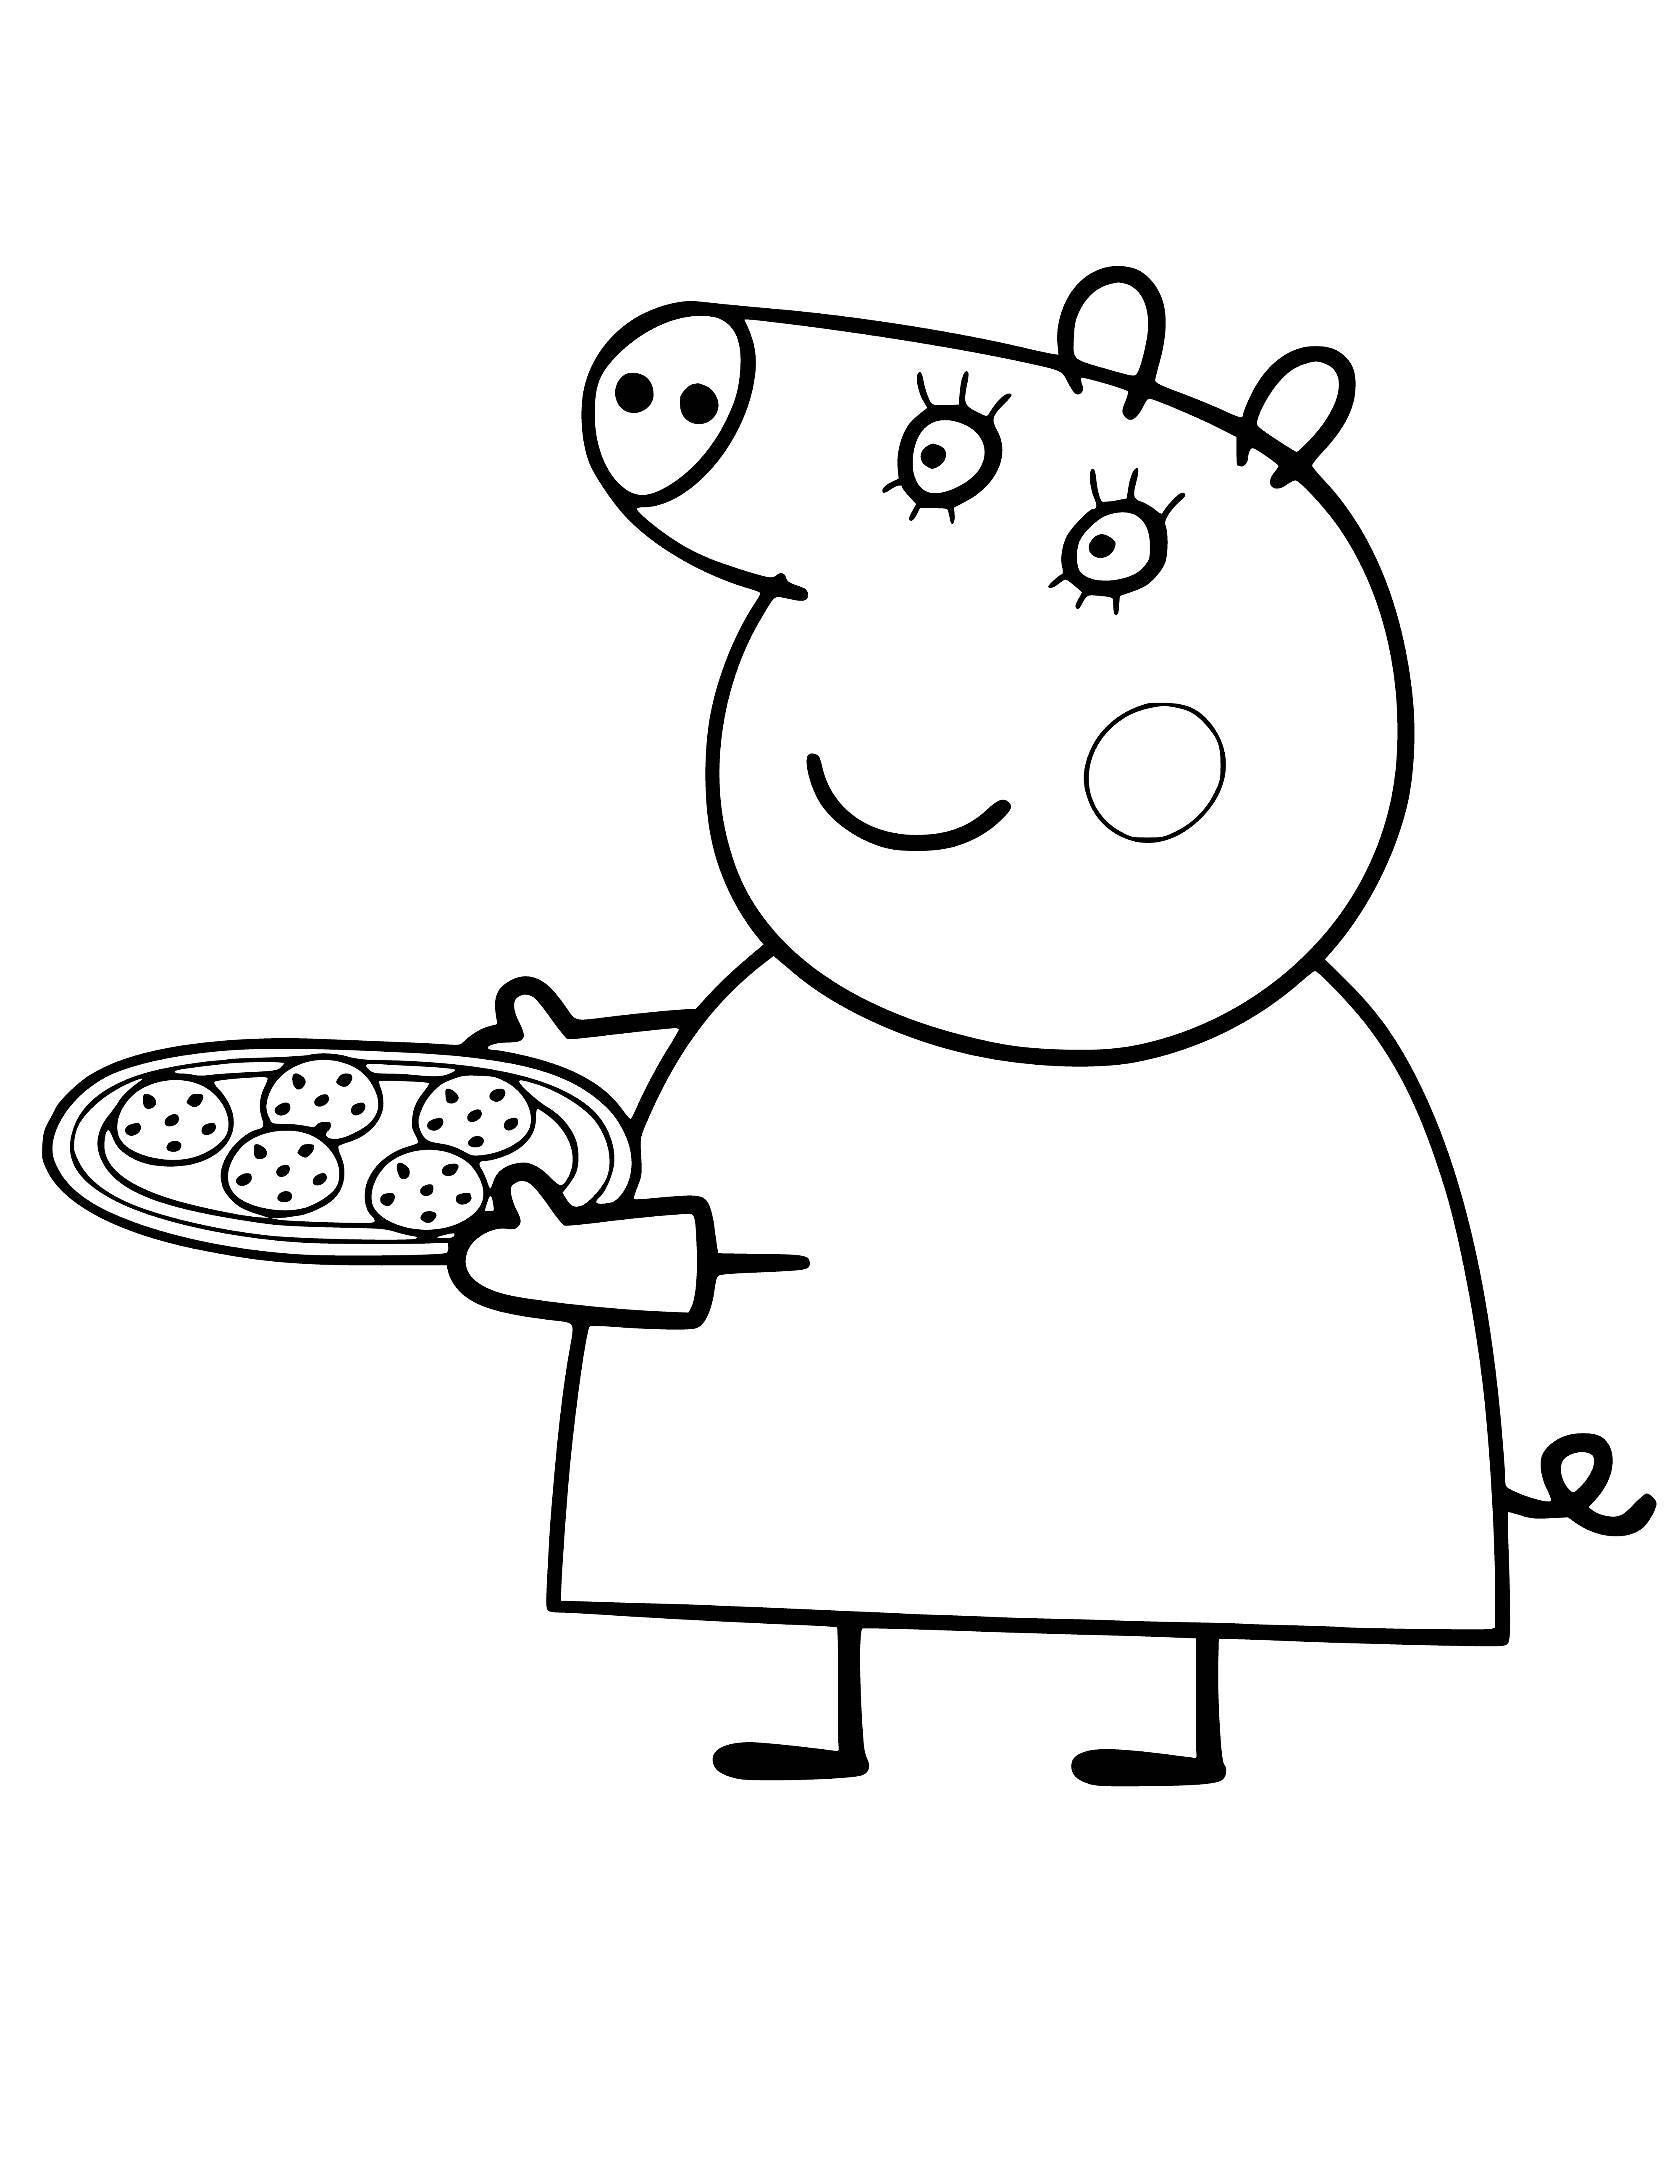 Mom Pig baked cookies coloring page